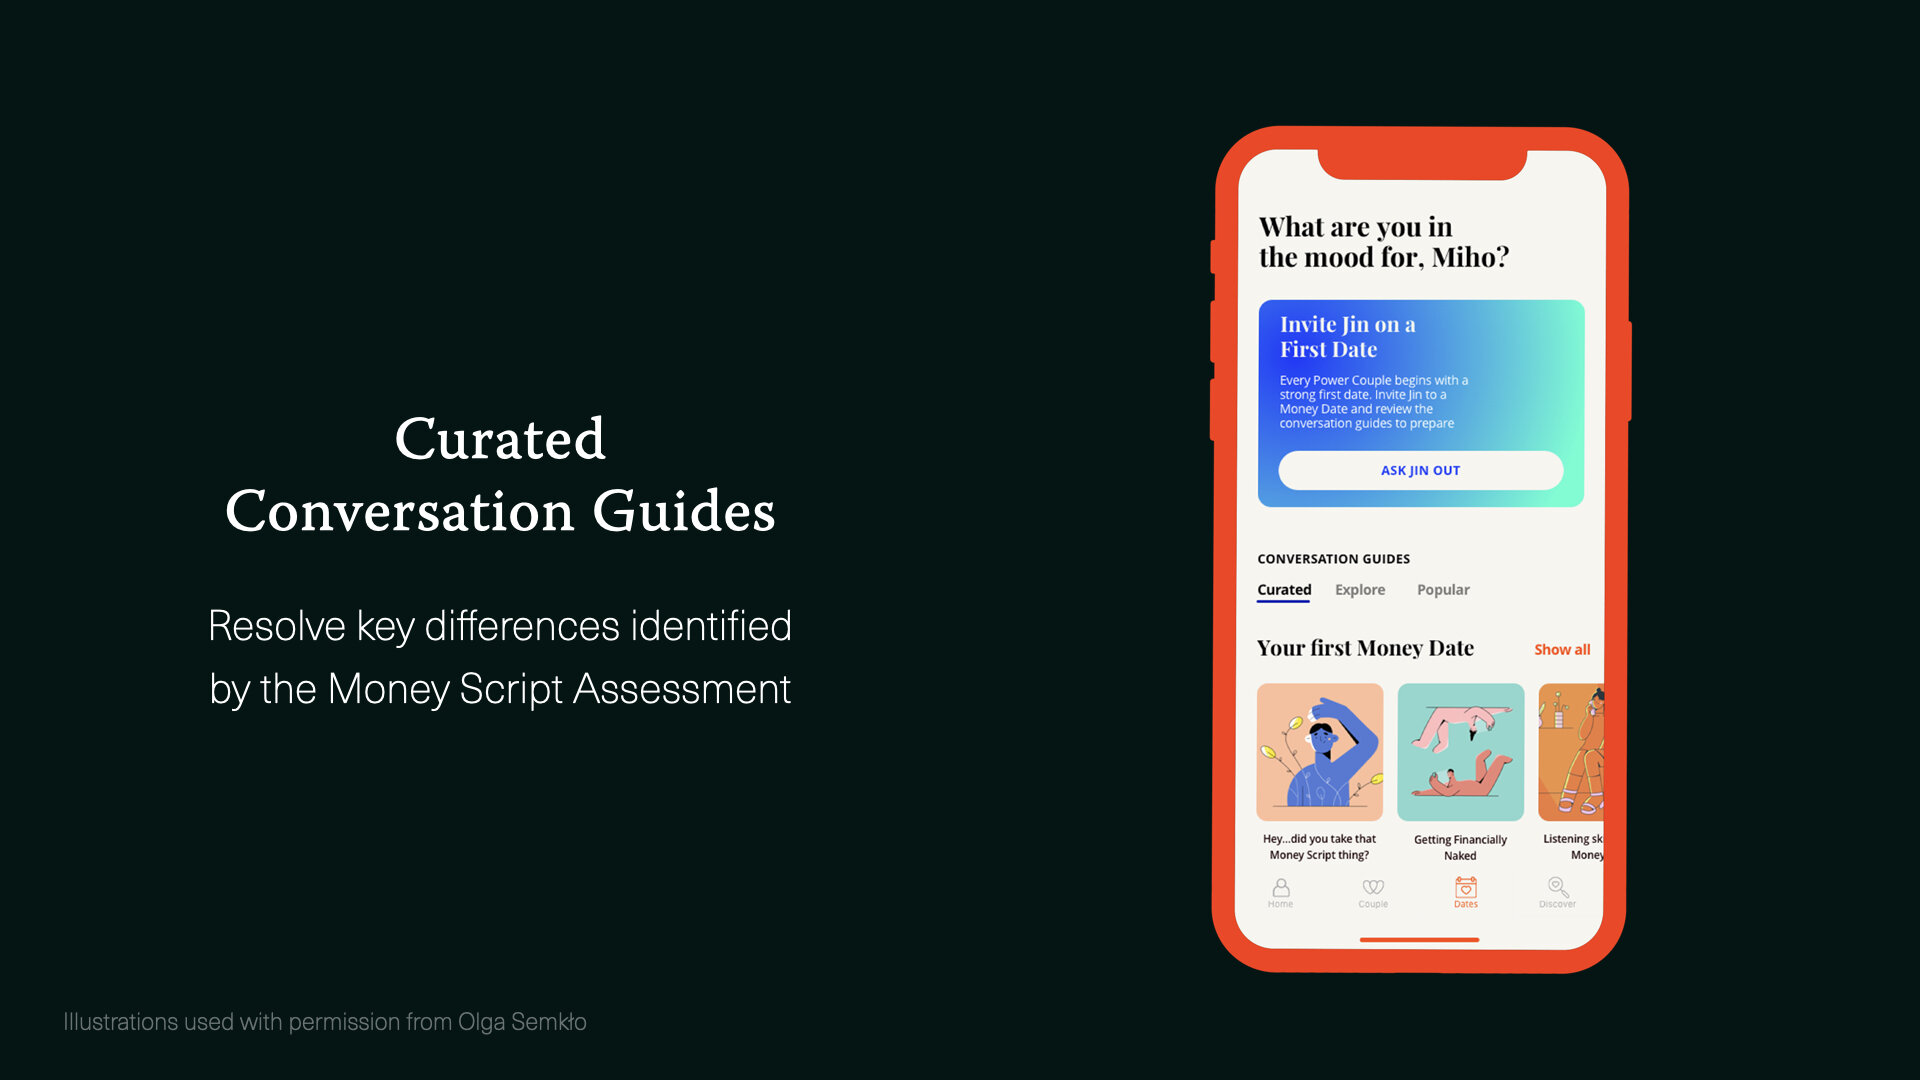 Curated Conversation Guides. Resolve key differences identified by the money script assessment.